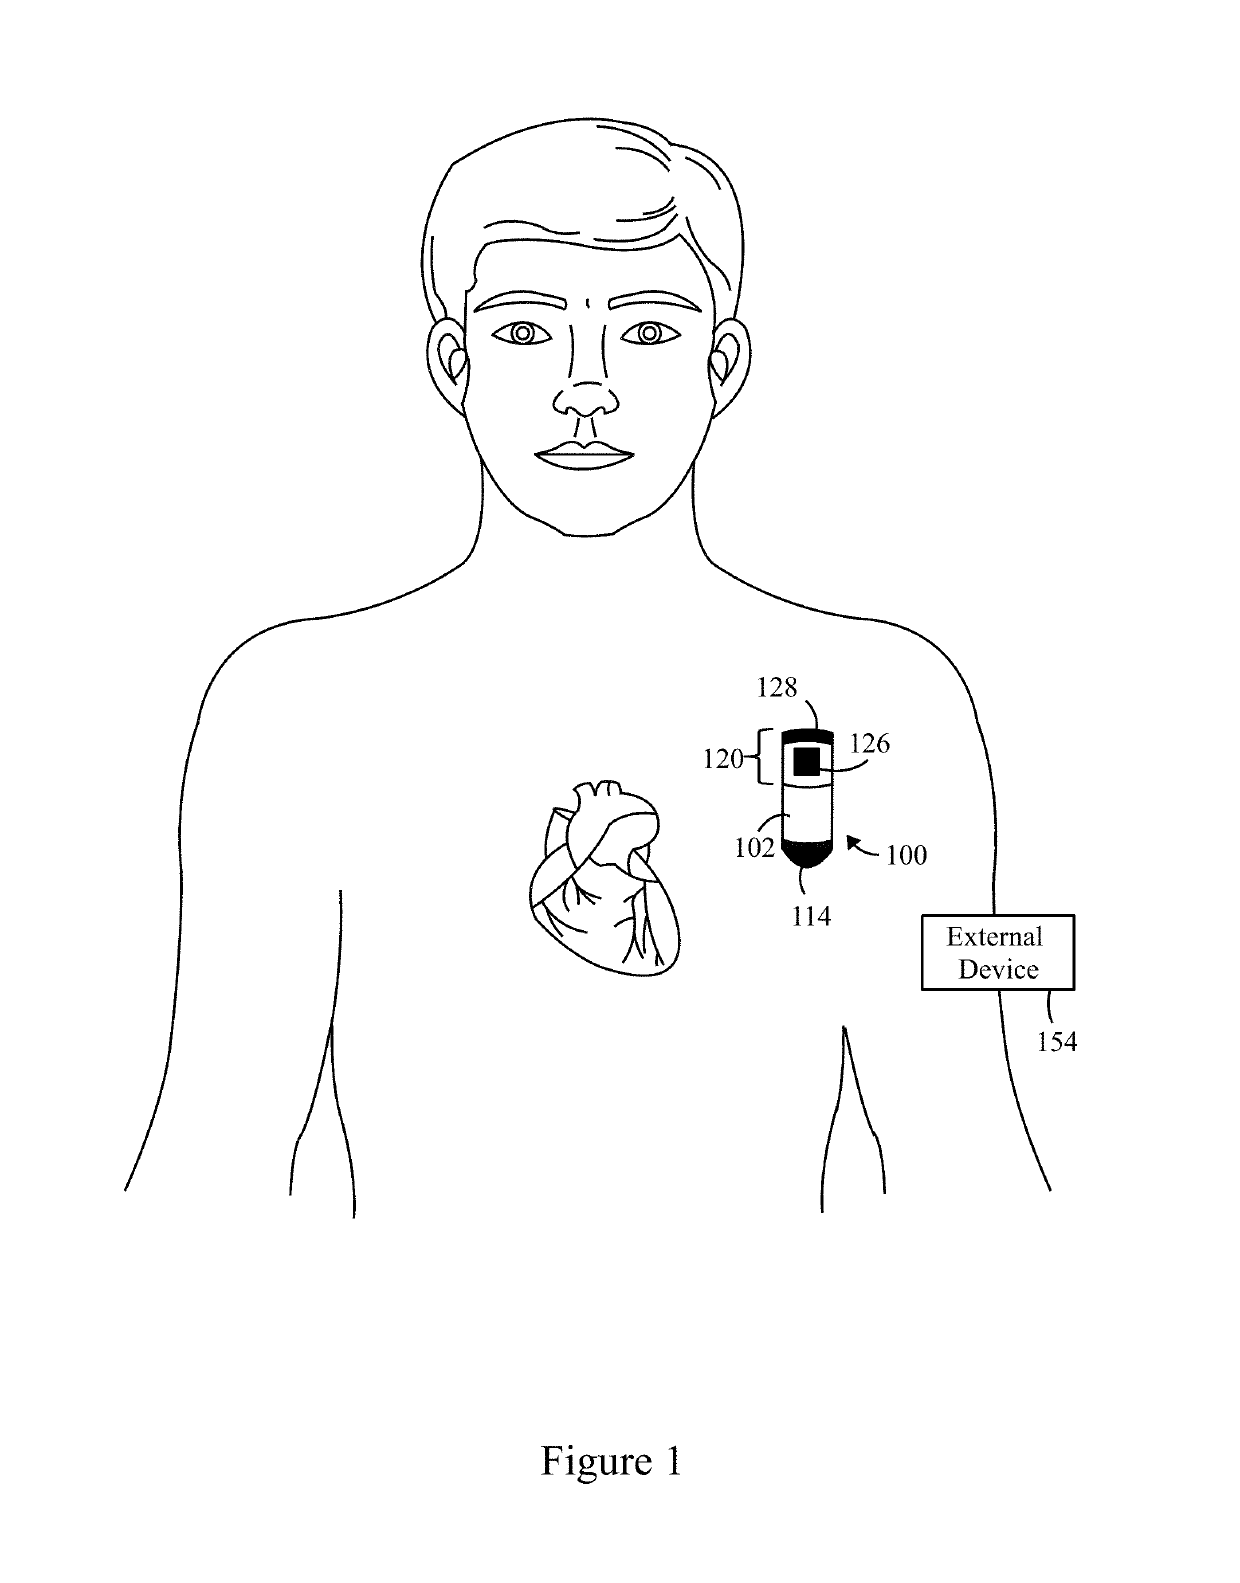 Method and system to detect r-waves in cardiac arrhythmic patterns